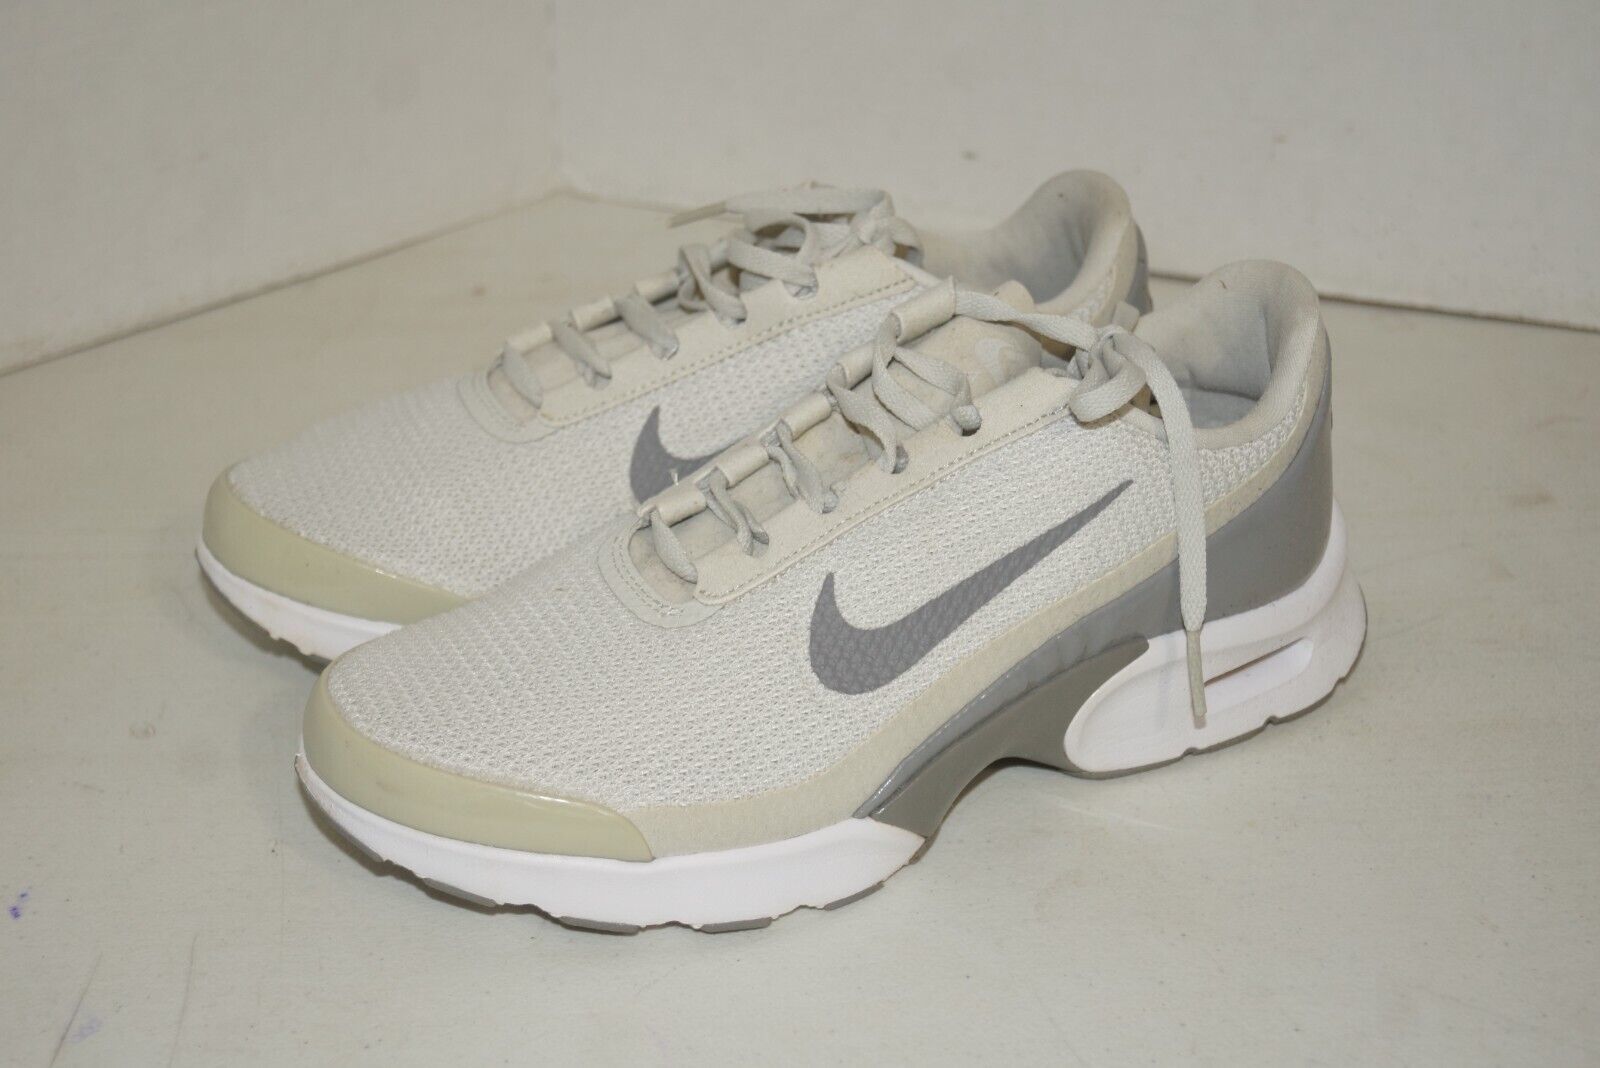 Primary image for Nike Air Max Jewel Athletic Shoe Women's Size 8.5 Beige Knit Trainer 896194-002